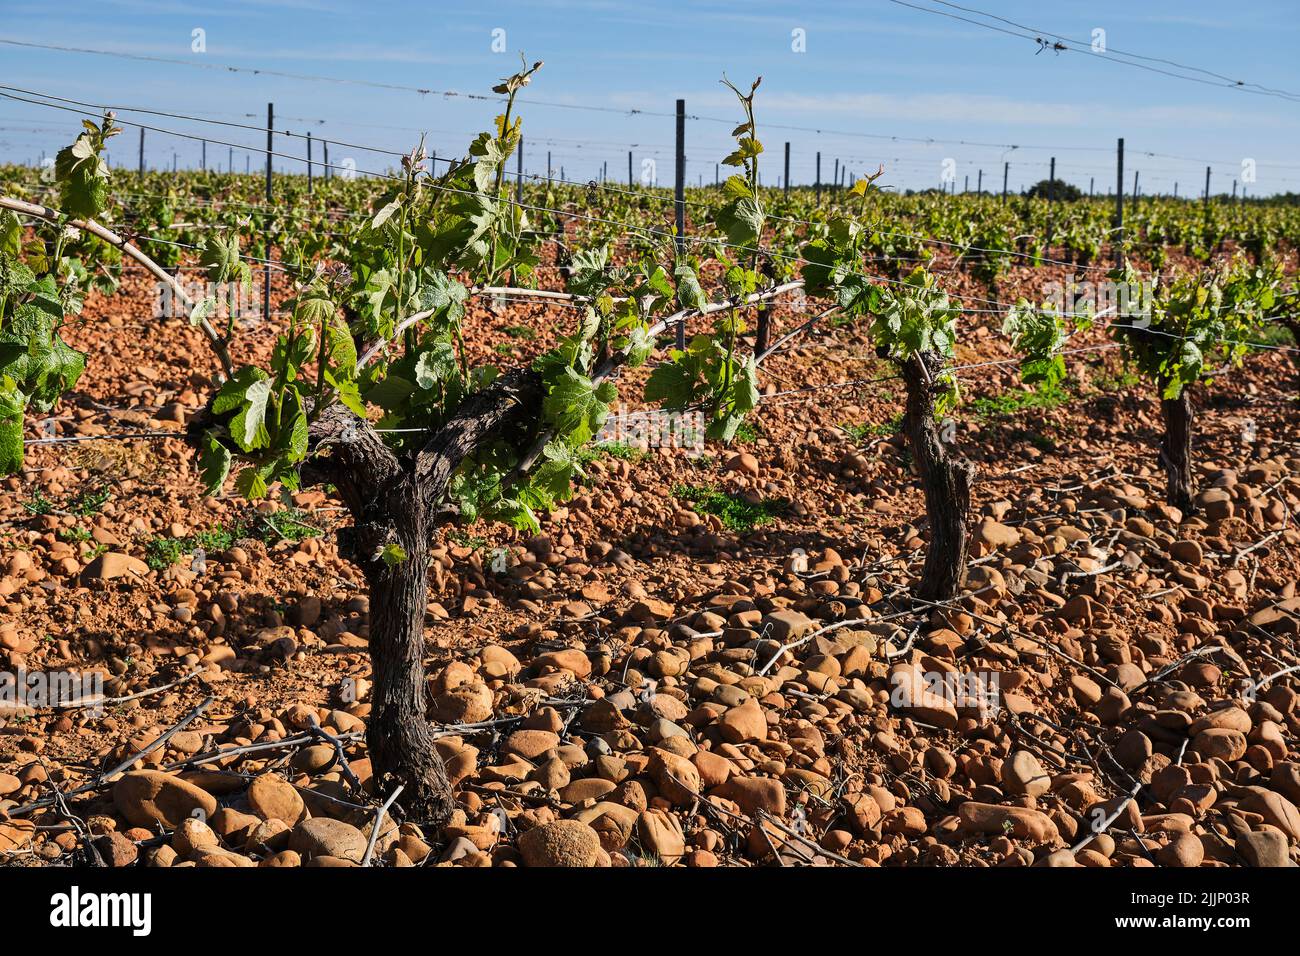 View of the rows of a vineyard growing under a blue sky in the countryside in spring Stock Photo